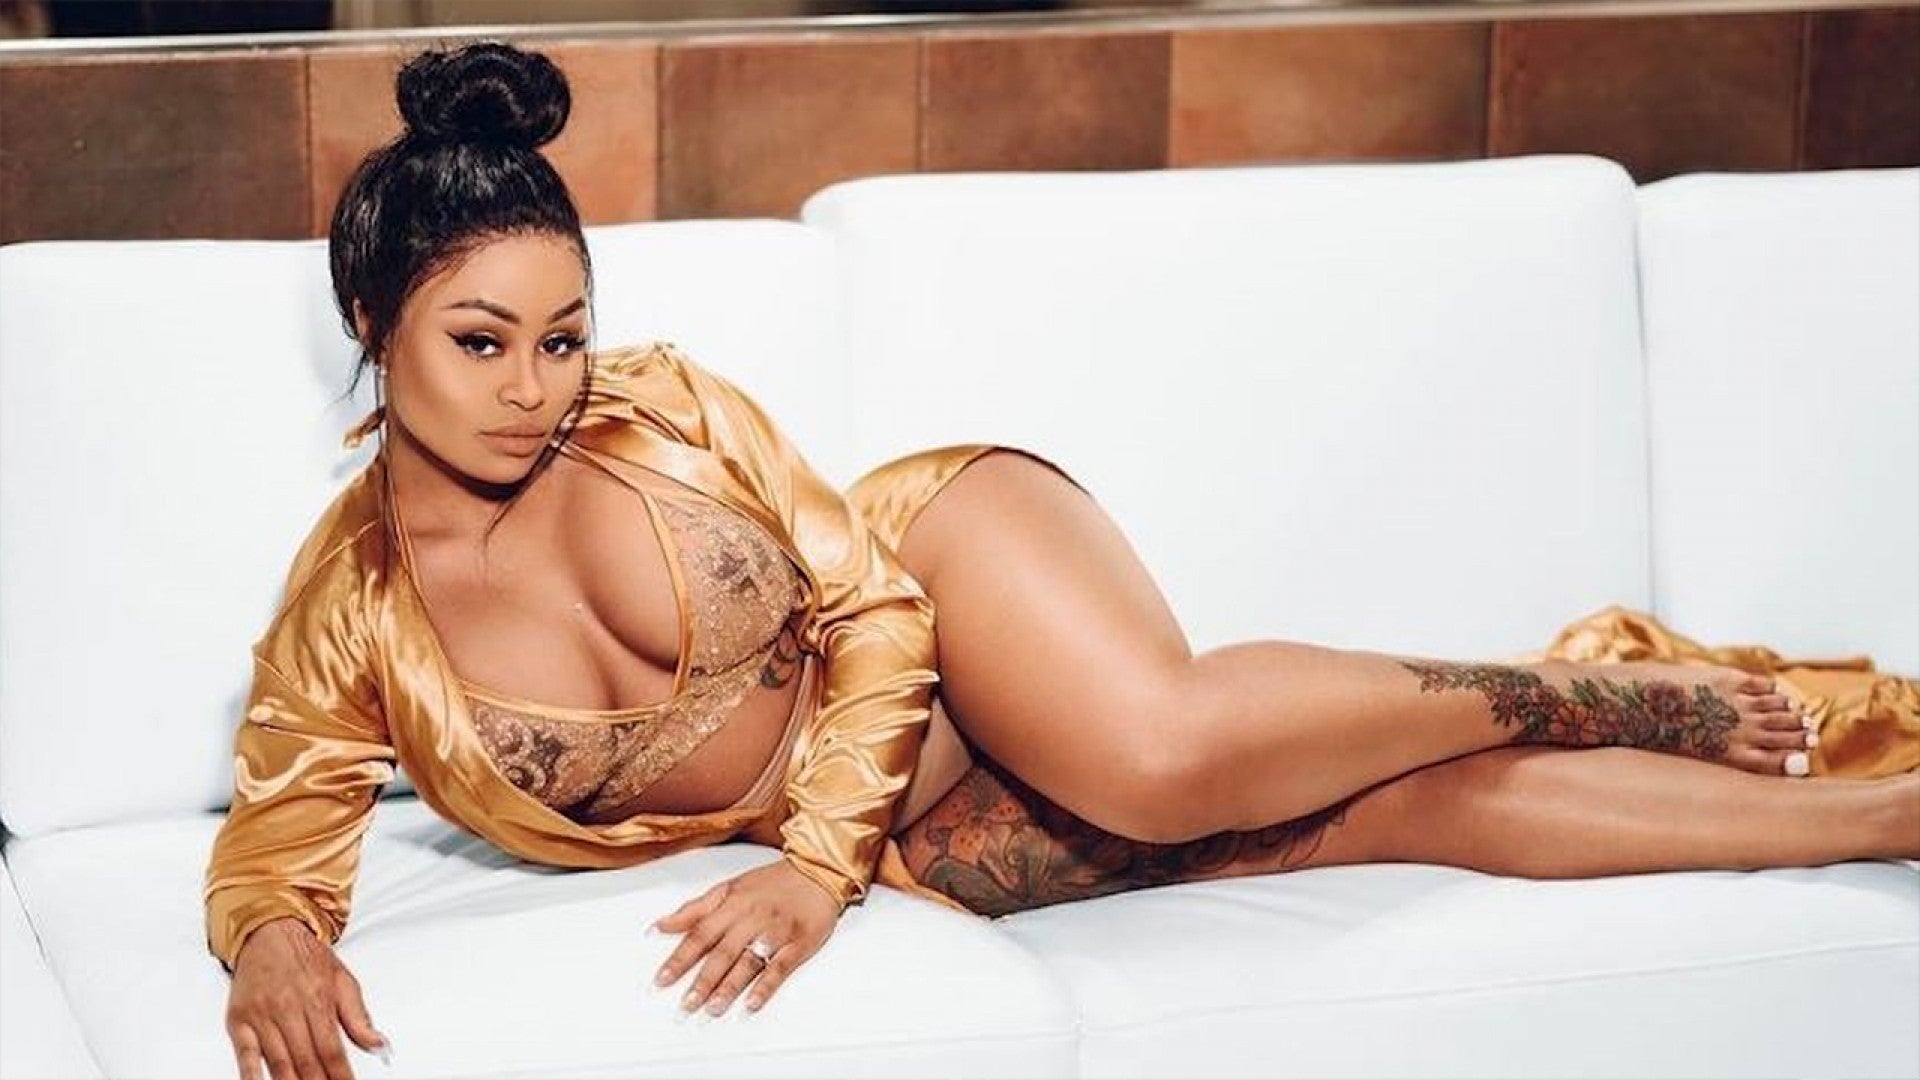 Blac Chyna Shows Off Post-Pregnancy Body in Sheer Gold Ensemble.